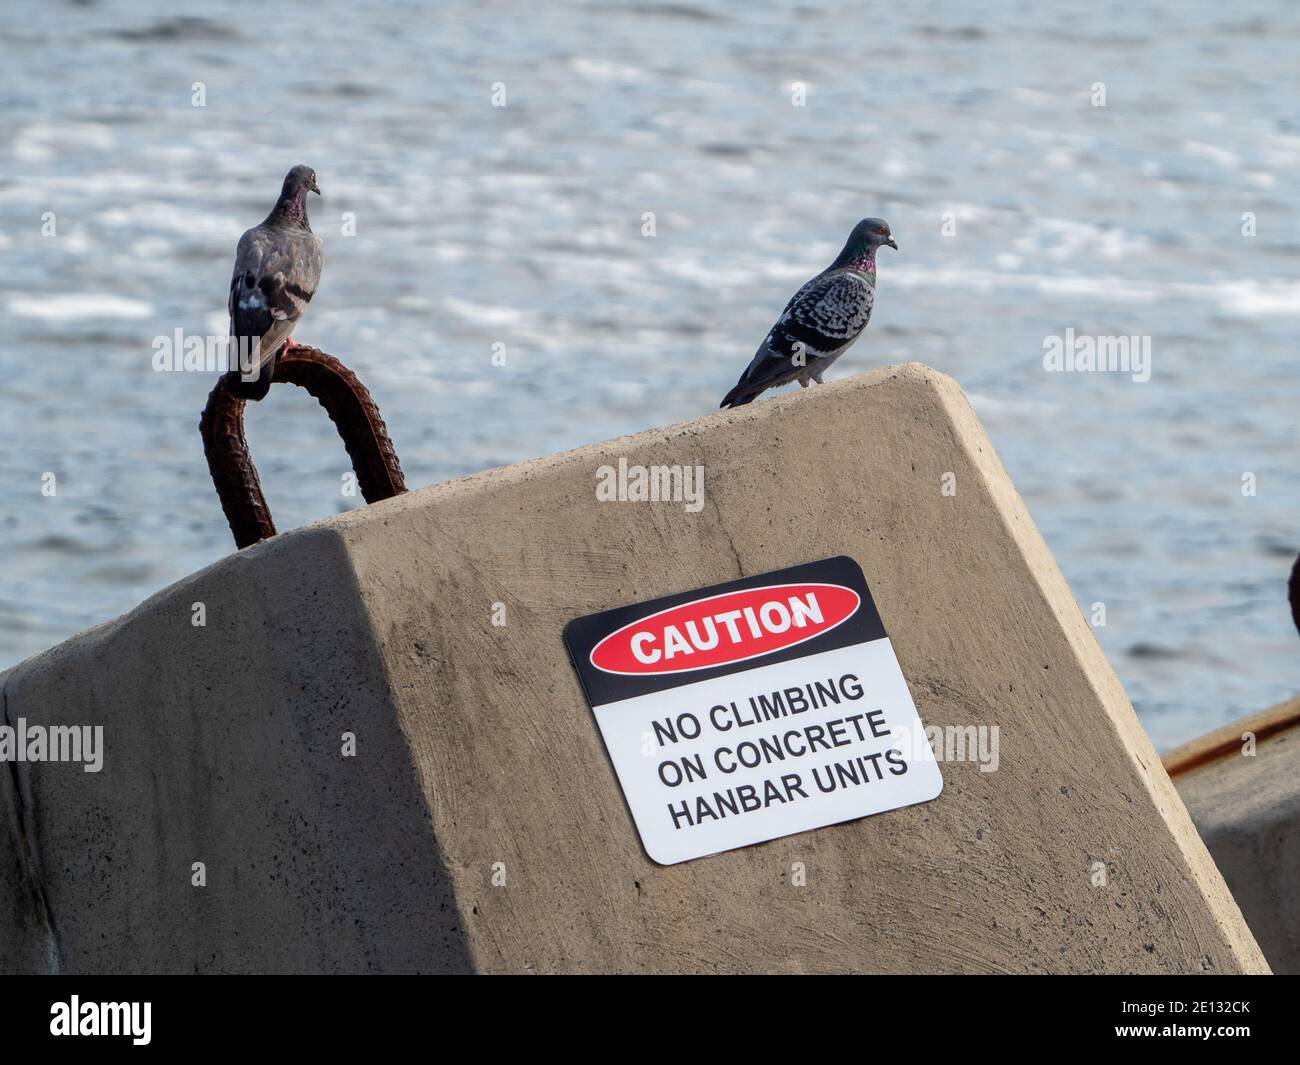 Pigeons by the sea, not heading the warning advice on the concrete Hanbar block sign Stock Photo